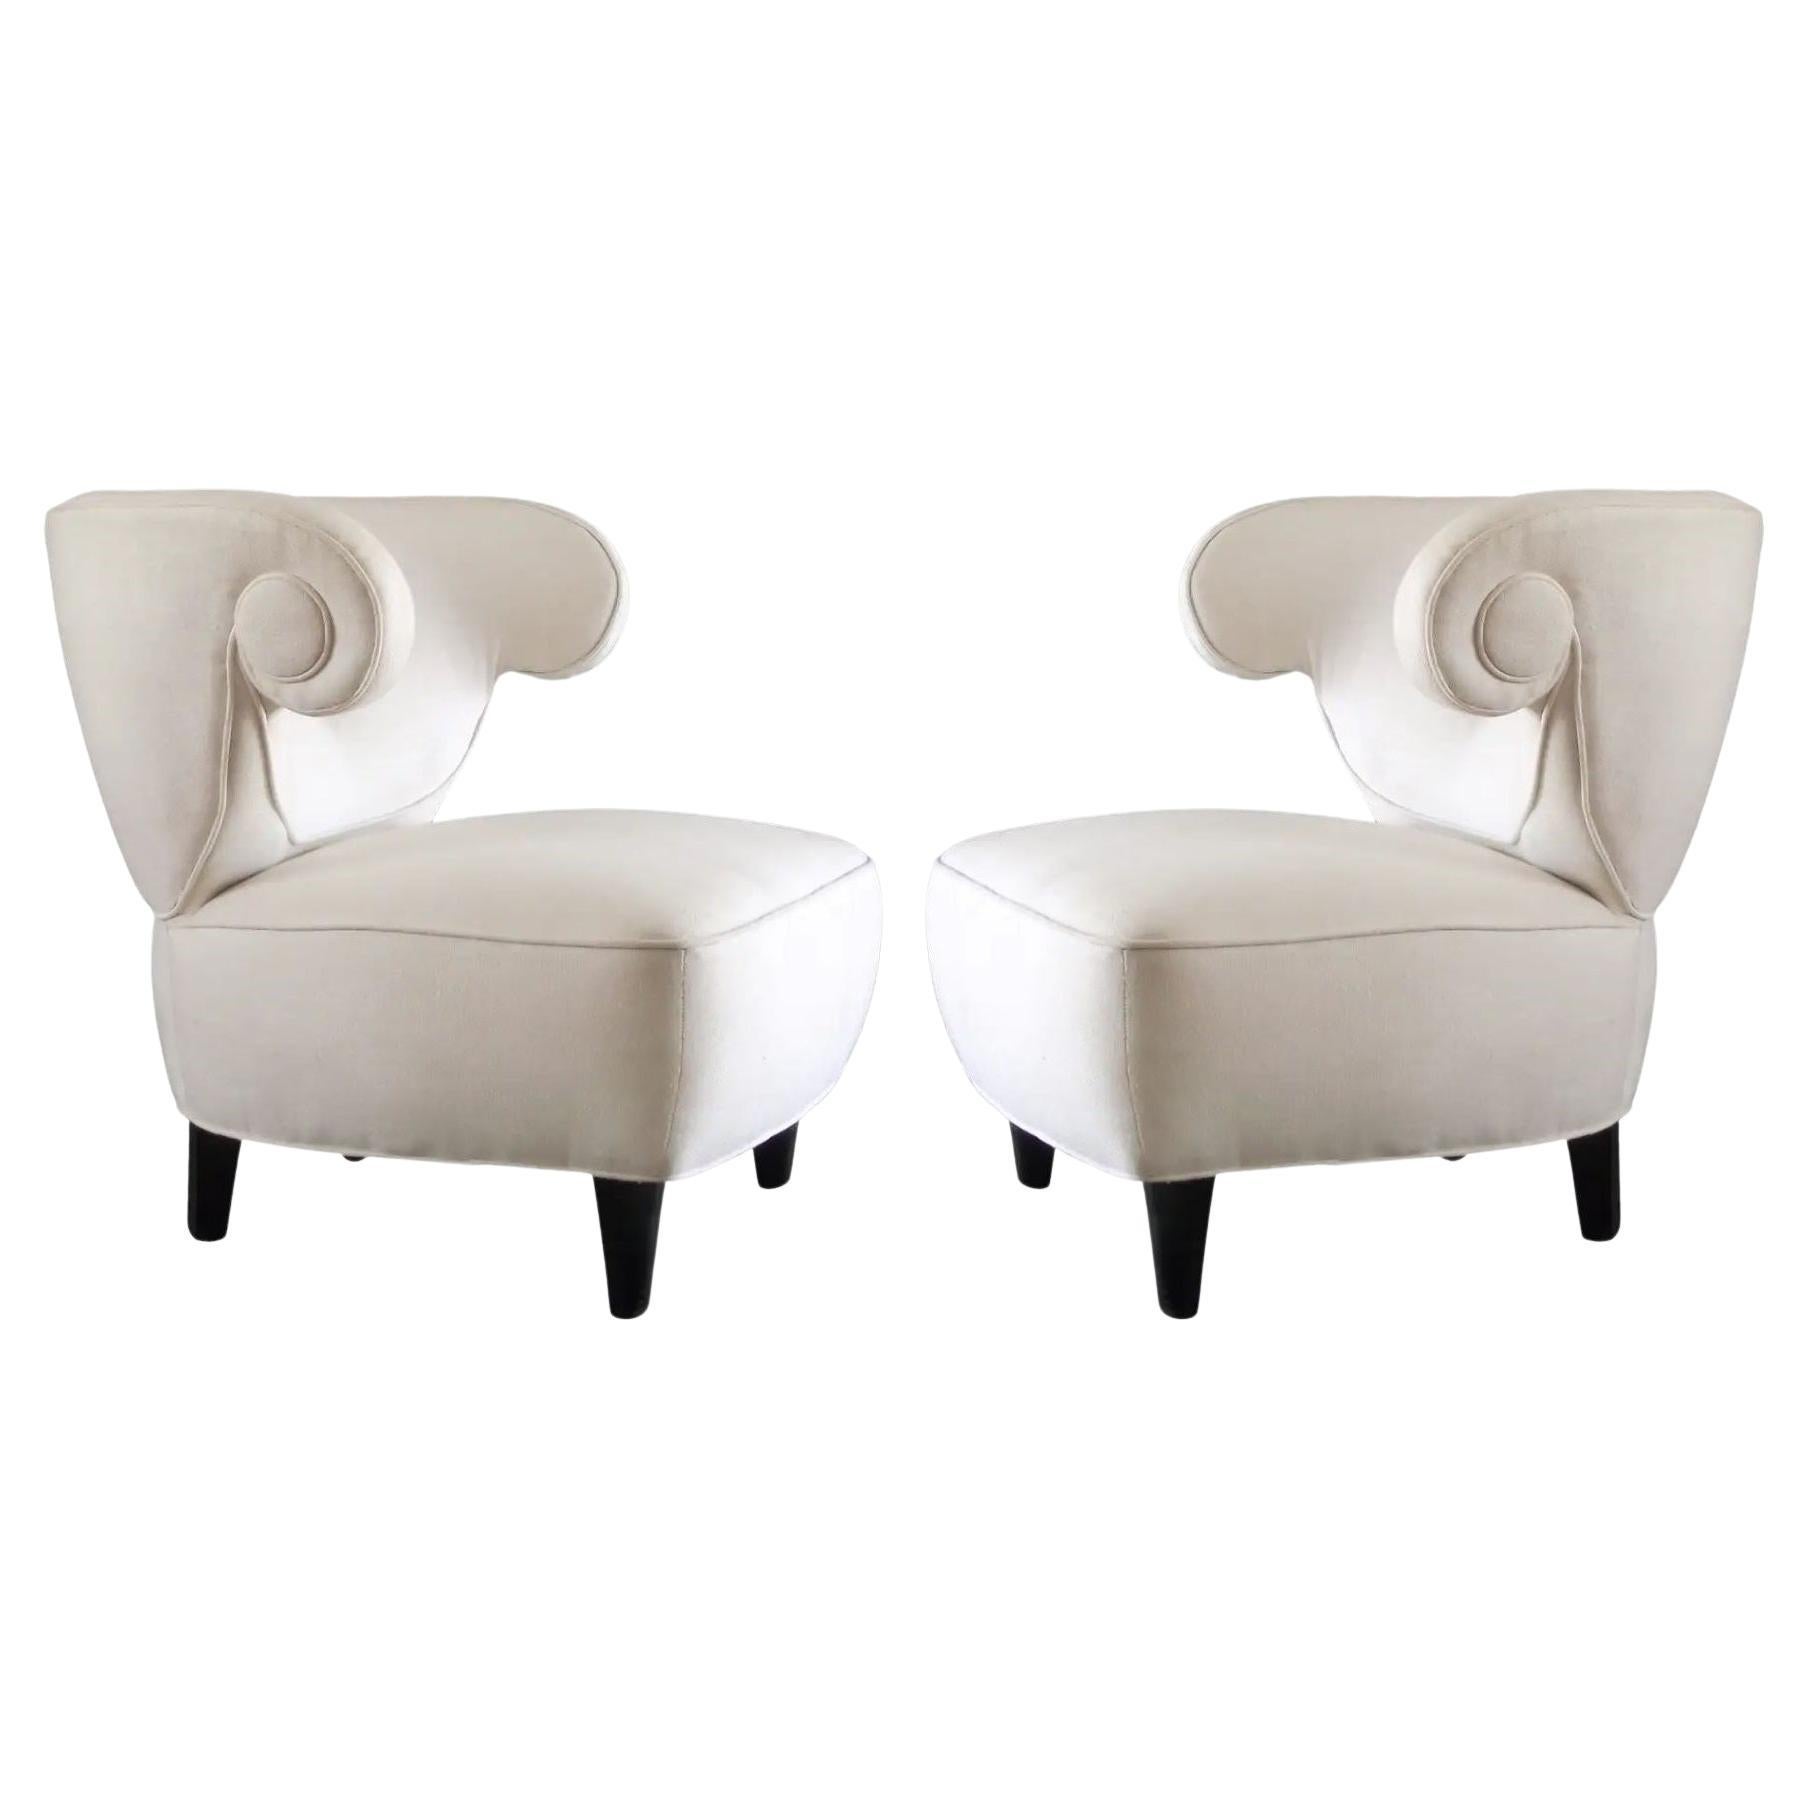 Pair of Scrolled-Arm Chairs by Paul László, 1940s